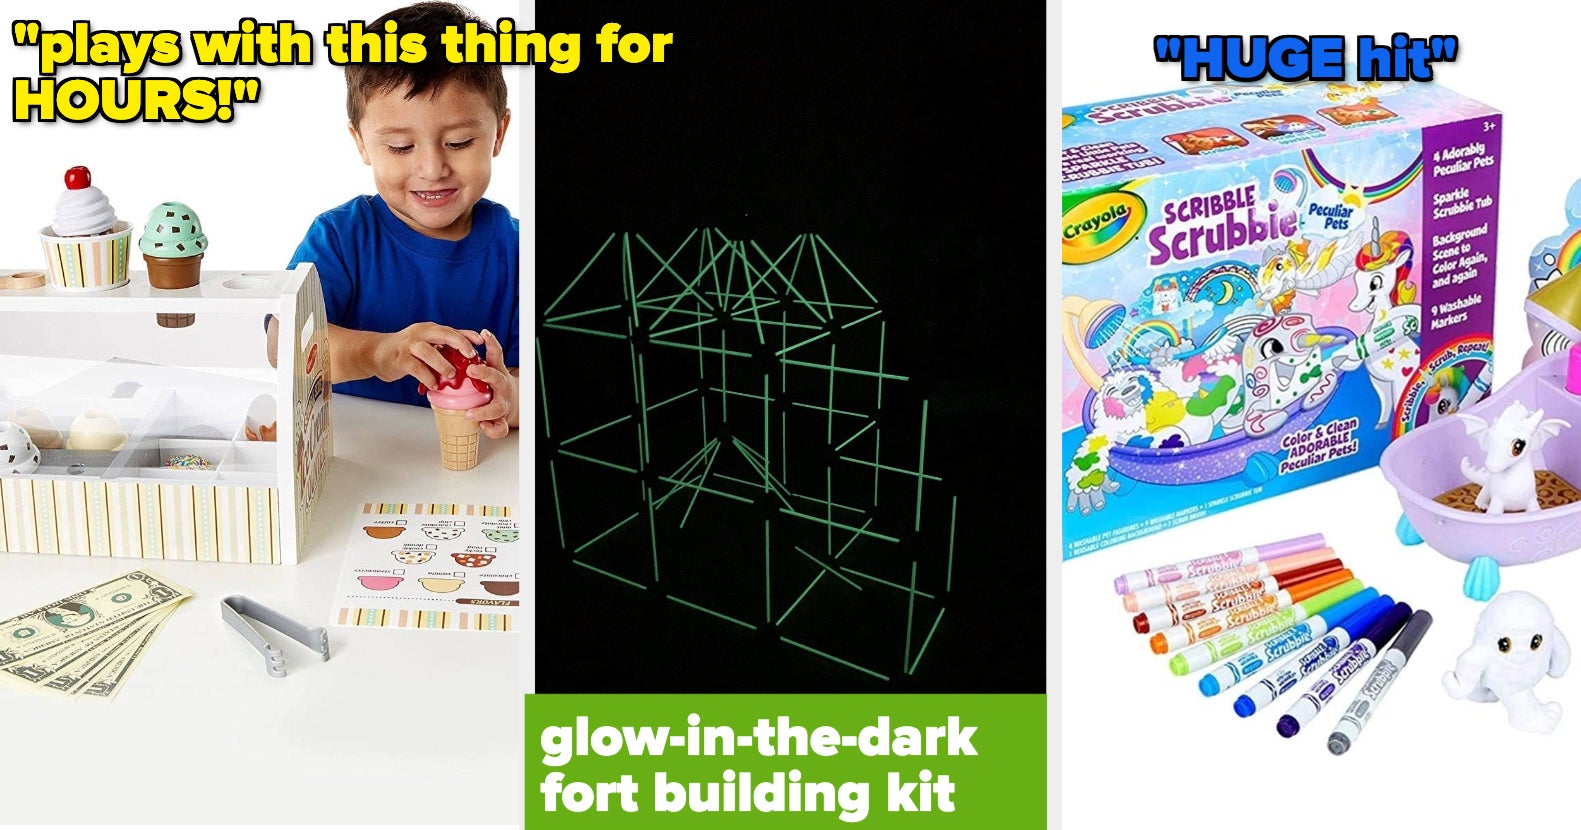 Discovery Channel Kids STEM 3D Glow Spin Art Station.